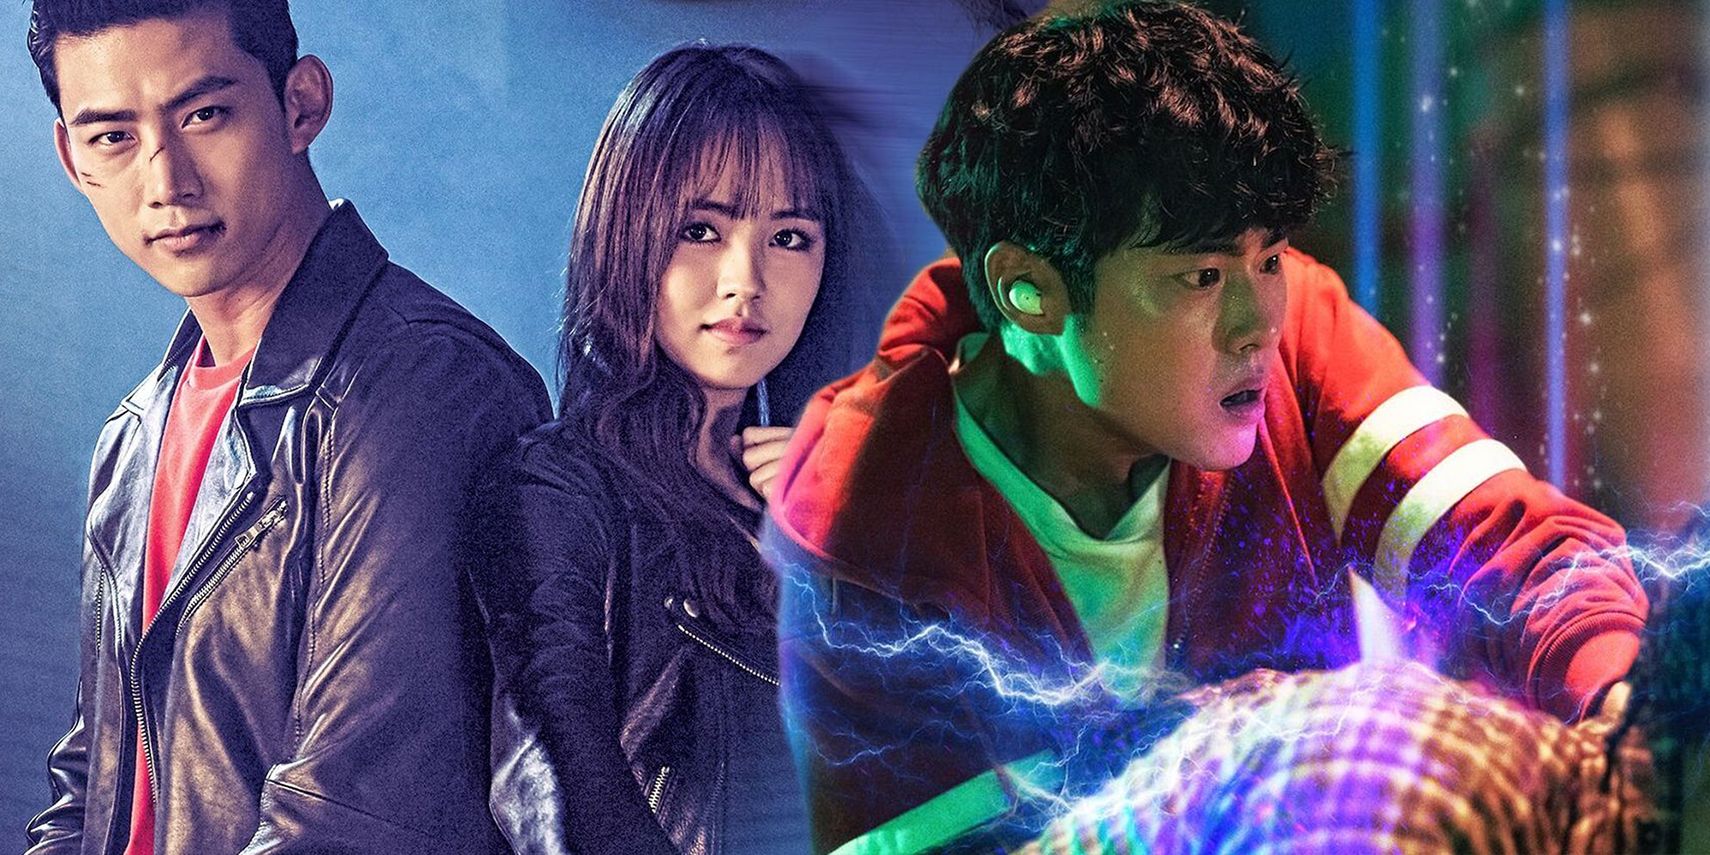 Review: Netflix's latest Korean drama mixes high school tropes and